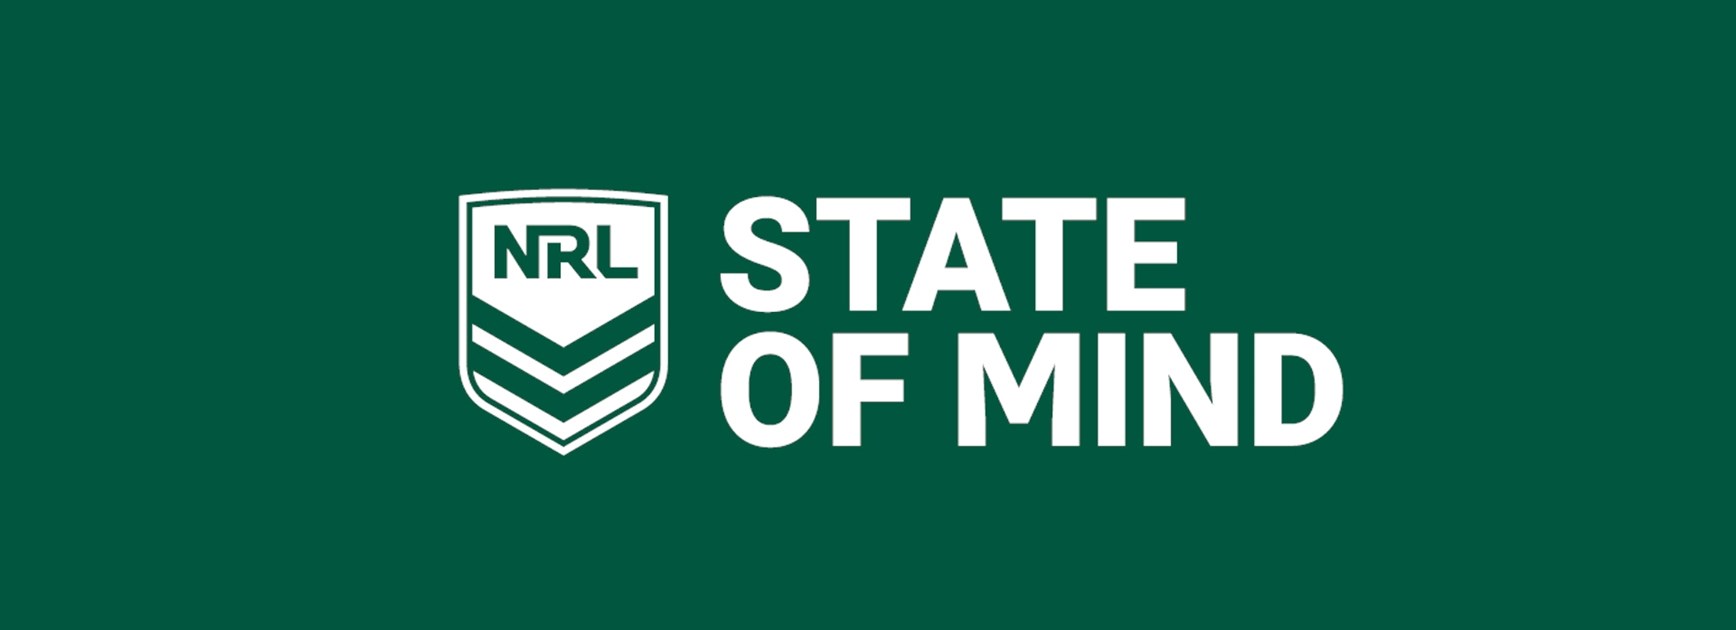 Broncos to host NRL State of Mind Education session